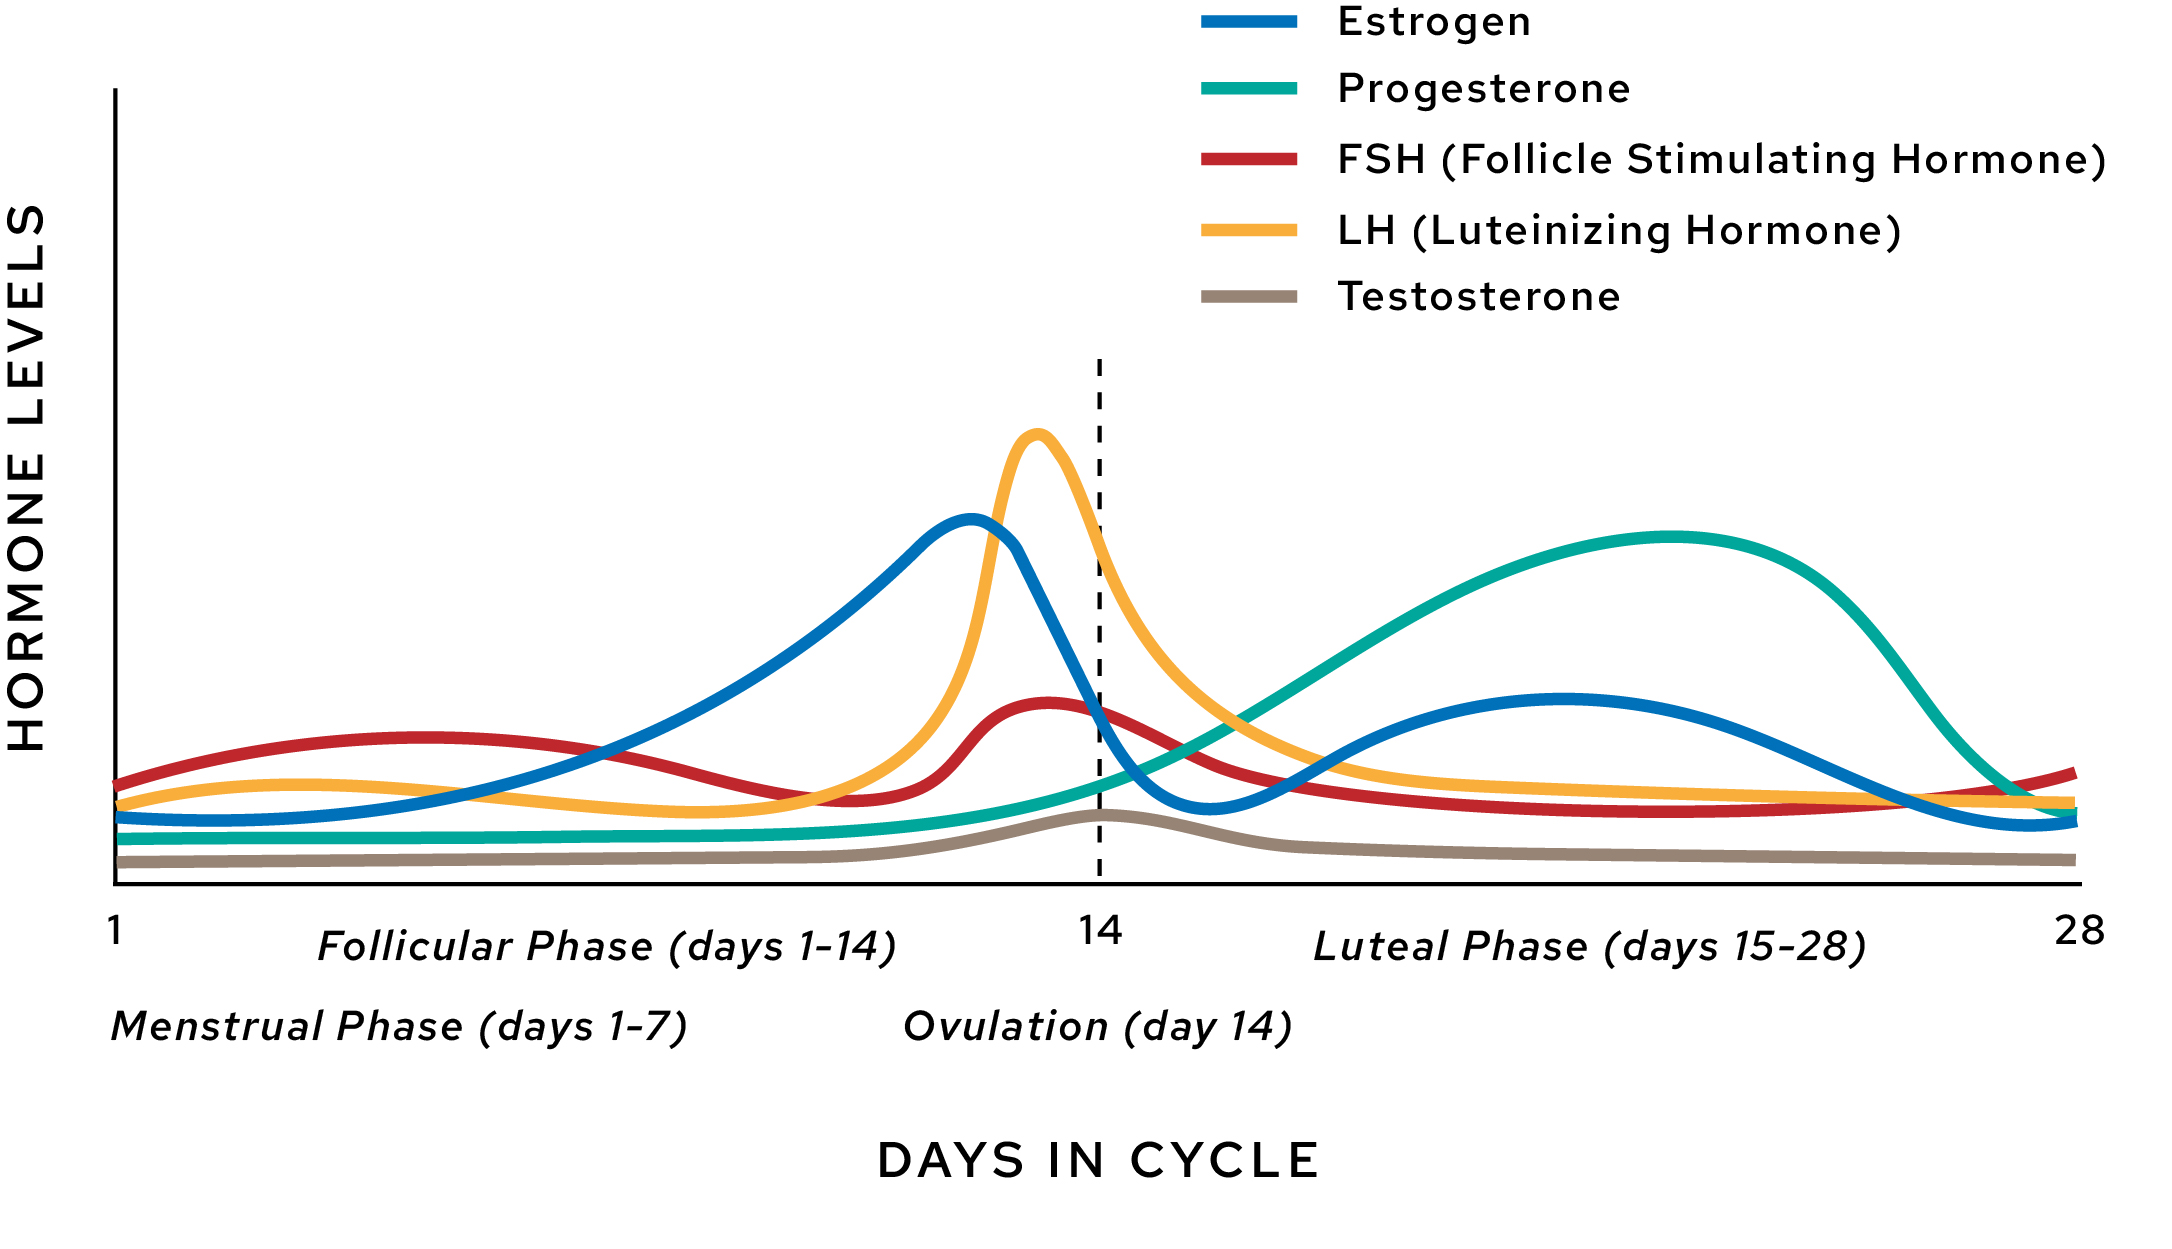 Master Your Menstrual Cycle: Hormones, Phases & Symptoms!